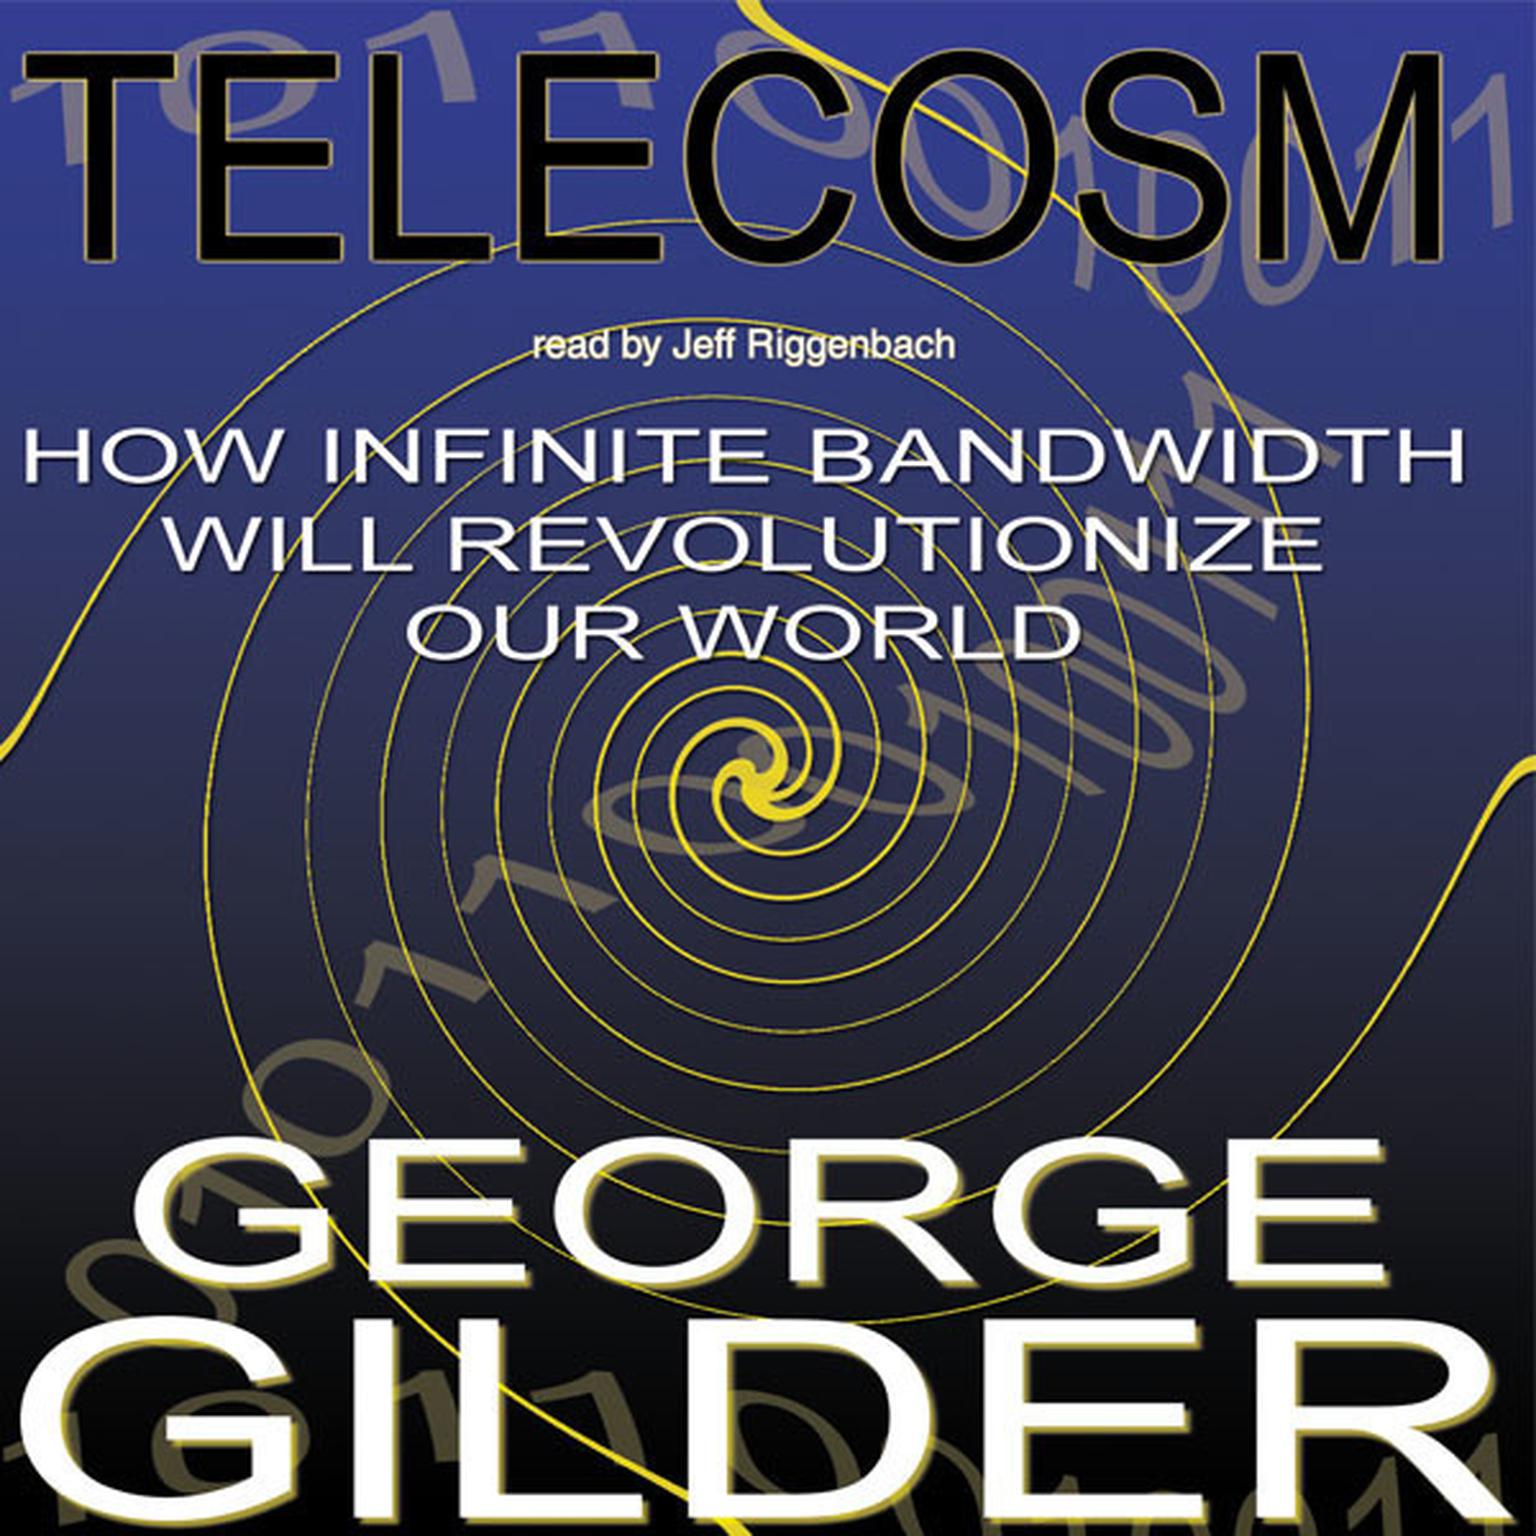 Telecosm: How Infinite Bandwidth Will Revolutionize Our World Audiobook, by George Gilder